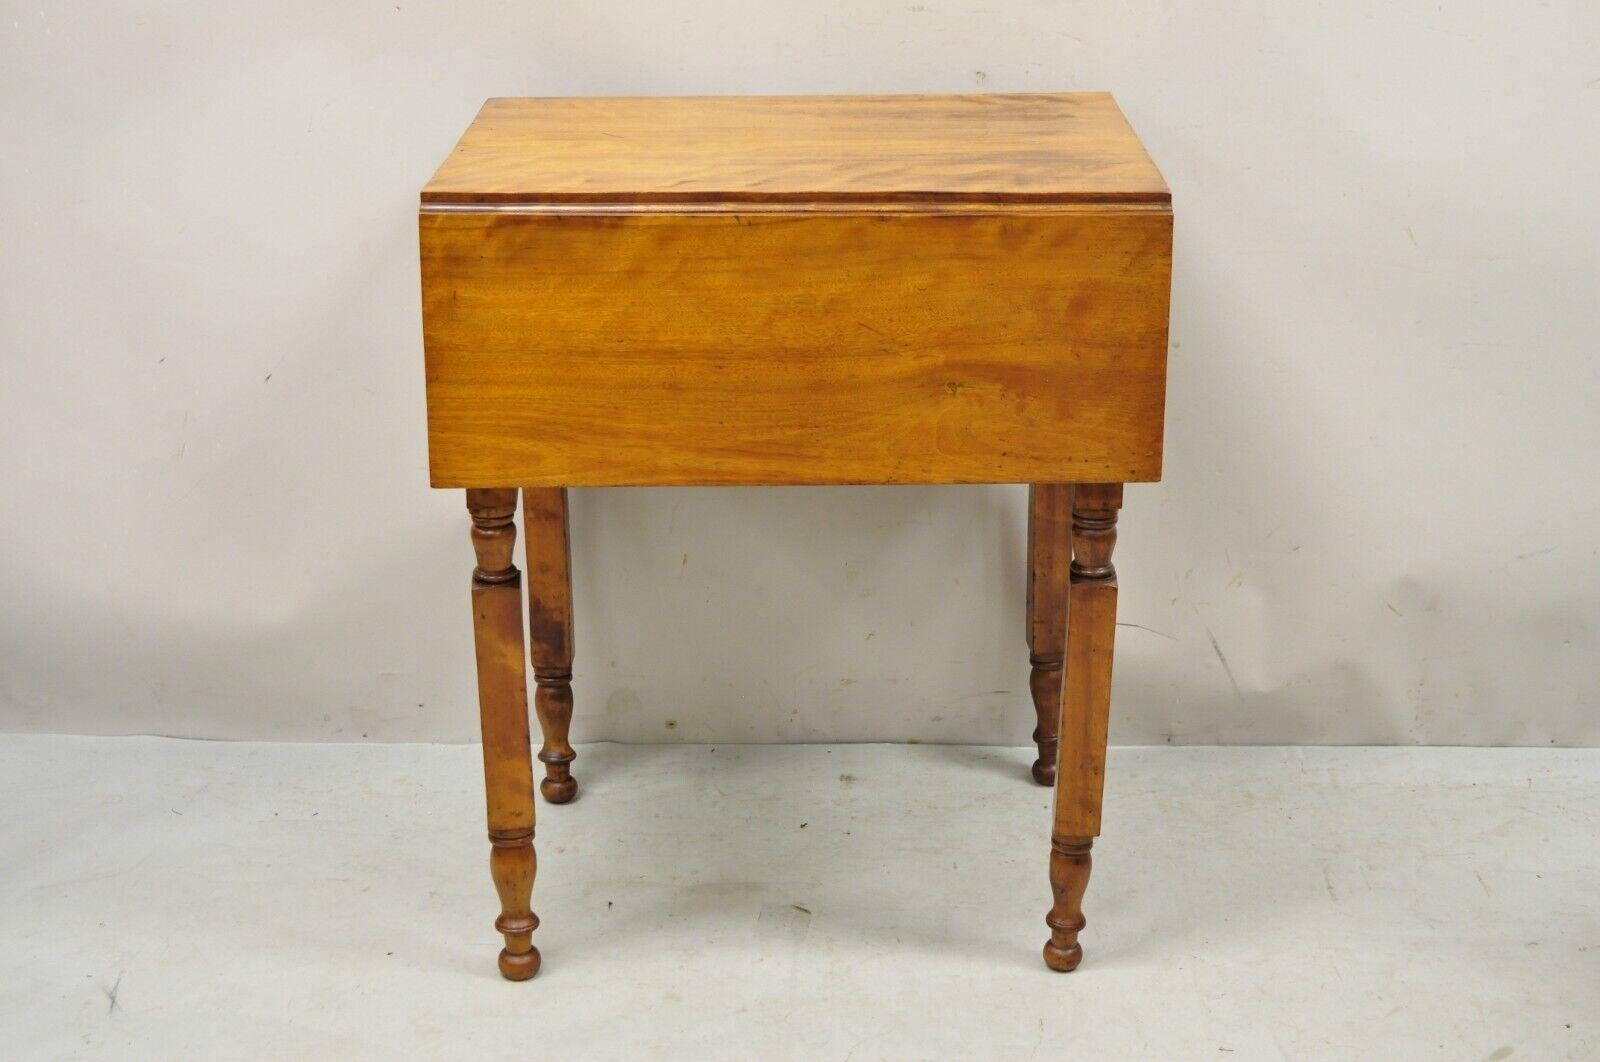 Antique Victorian Chestnut Drop Leaf Work Table Side Table with 2 Drawers For Sale 6